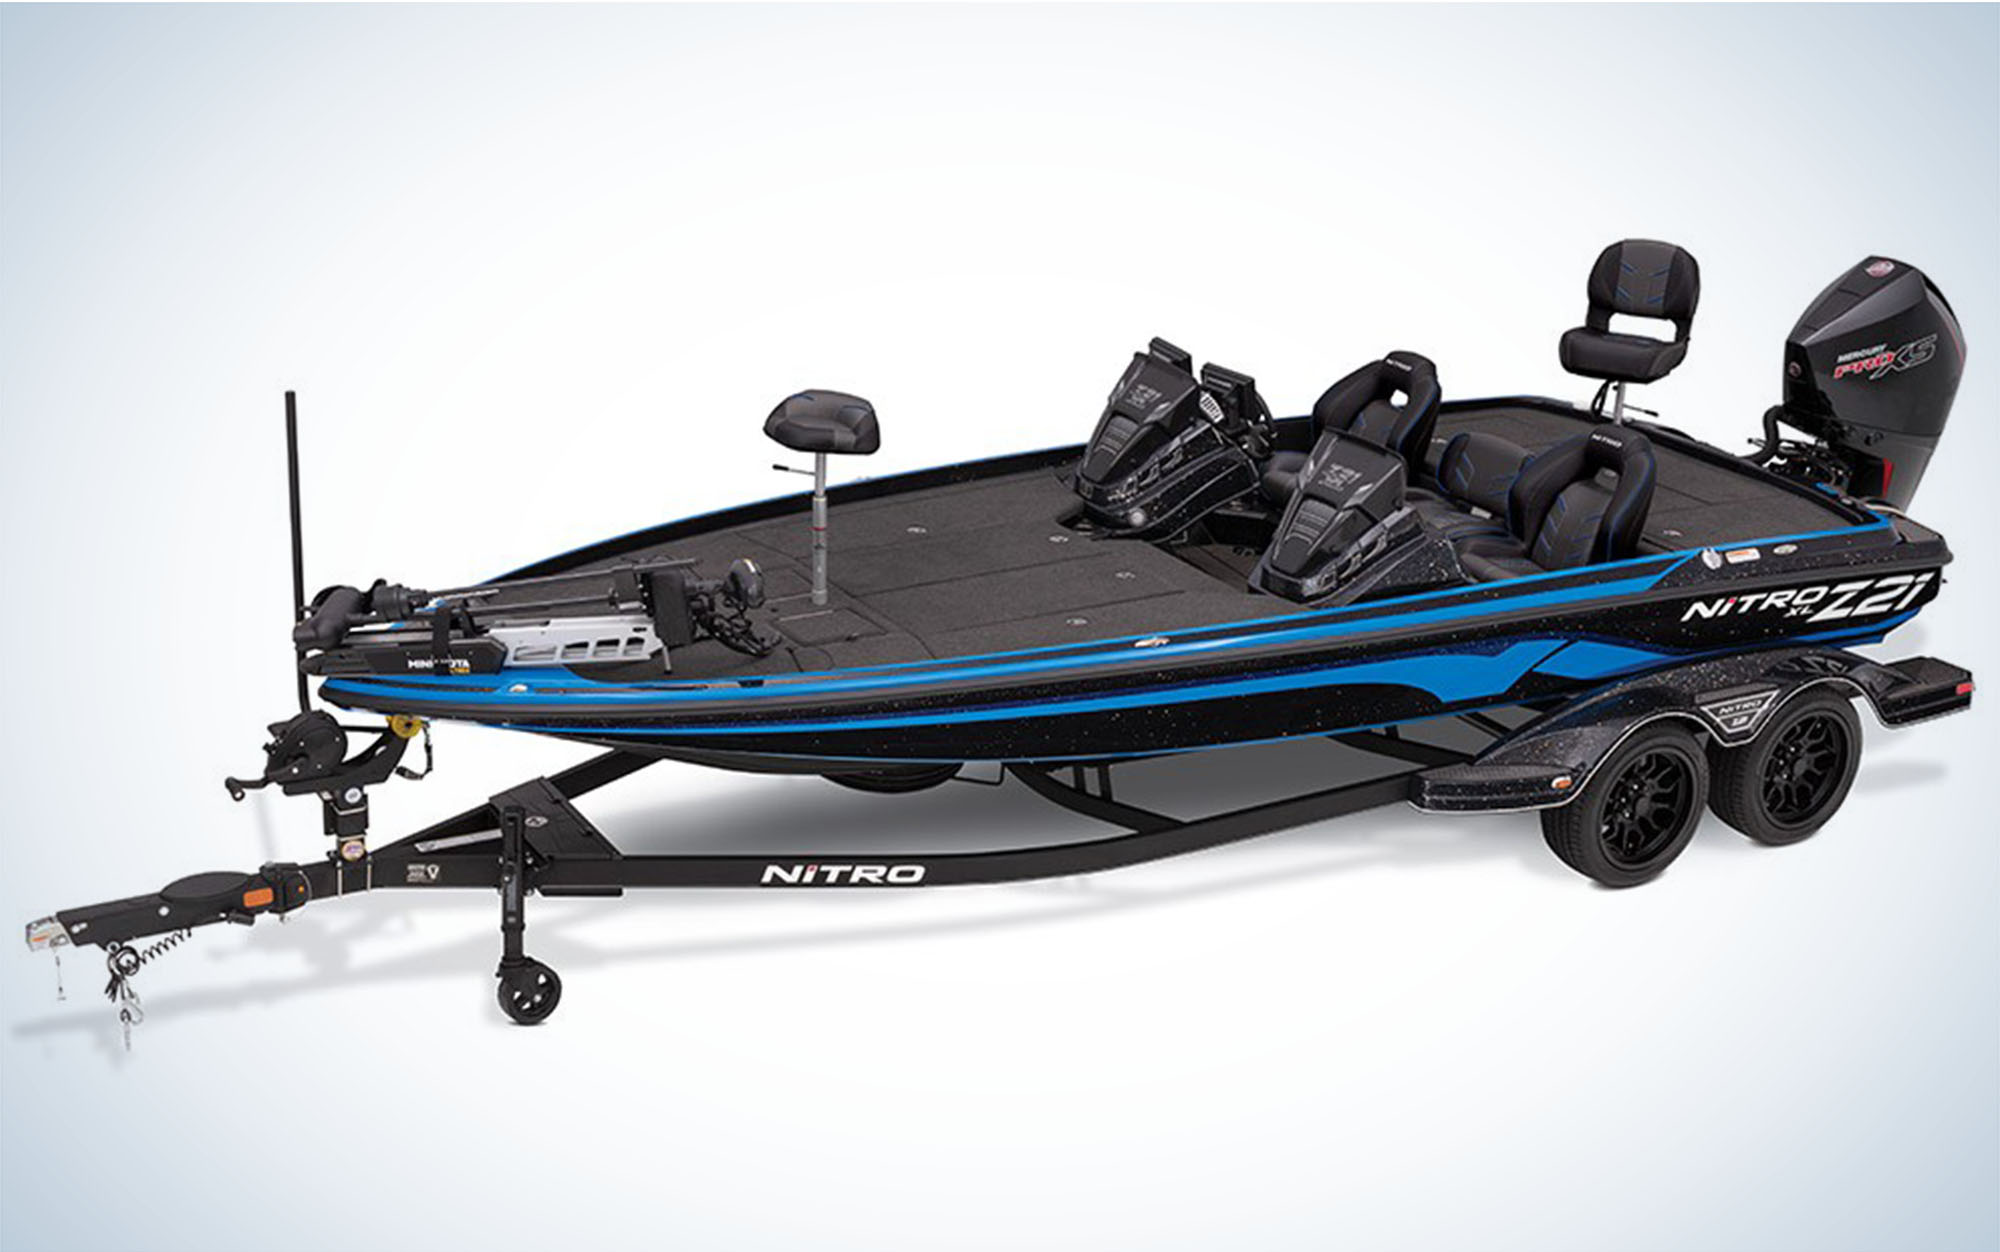 The Nitro Z17 is one of the best bass boats.